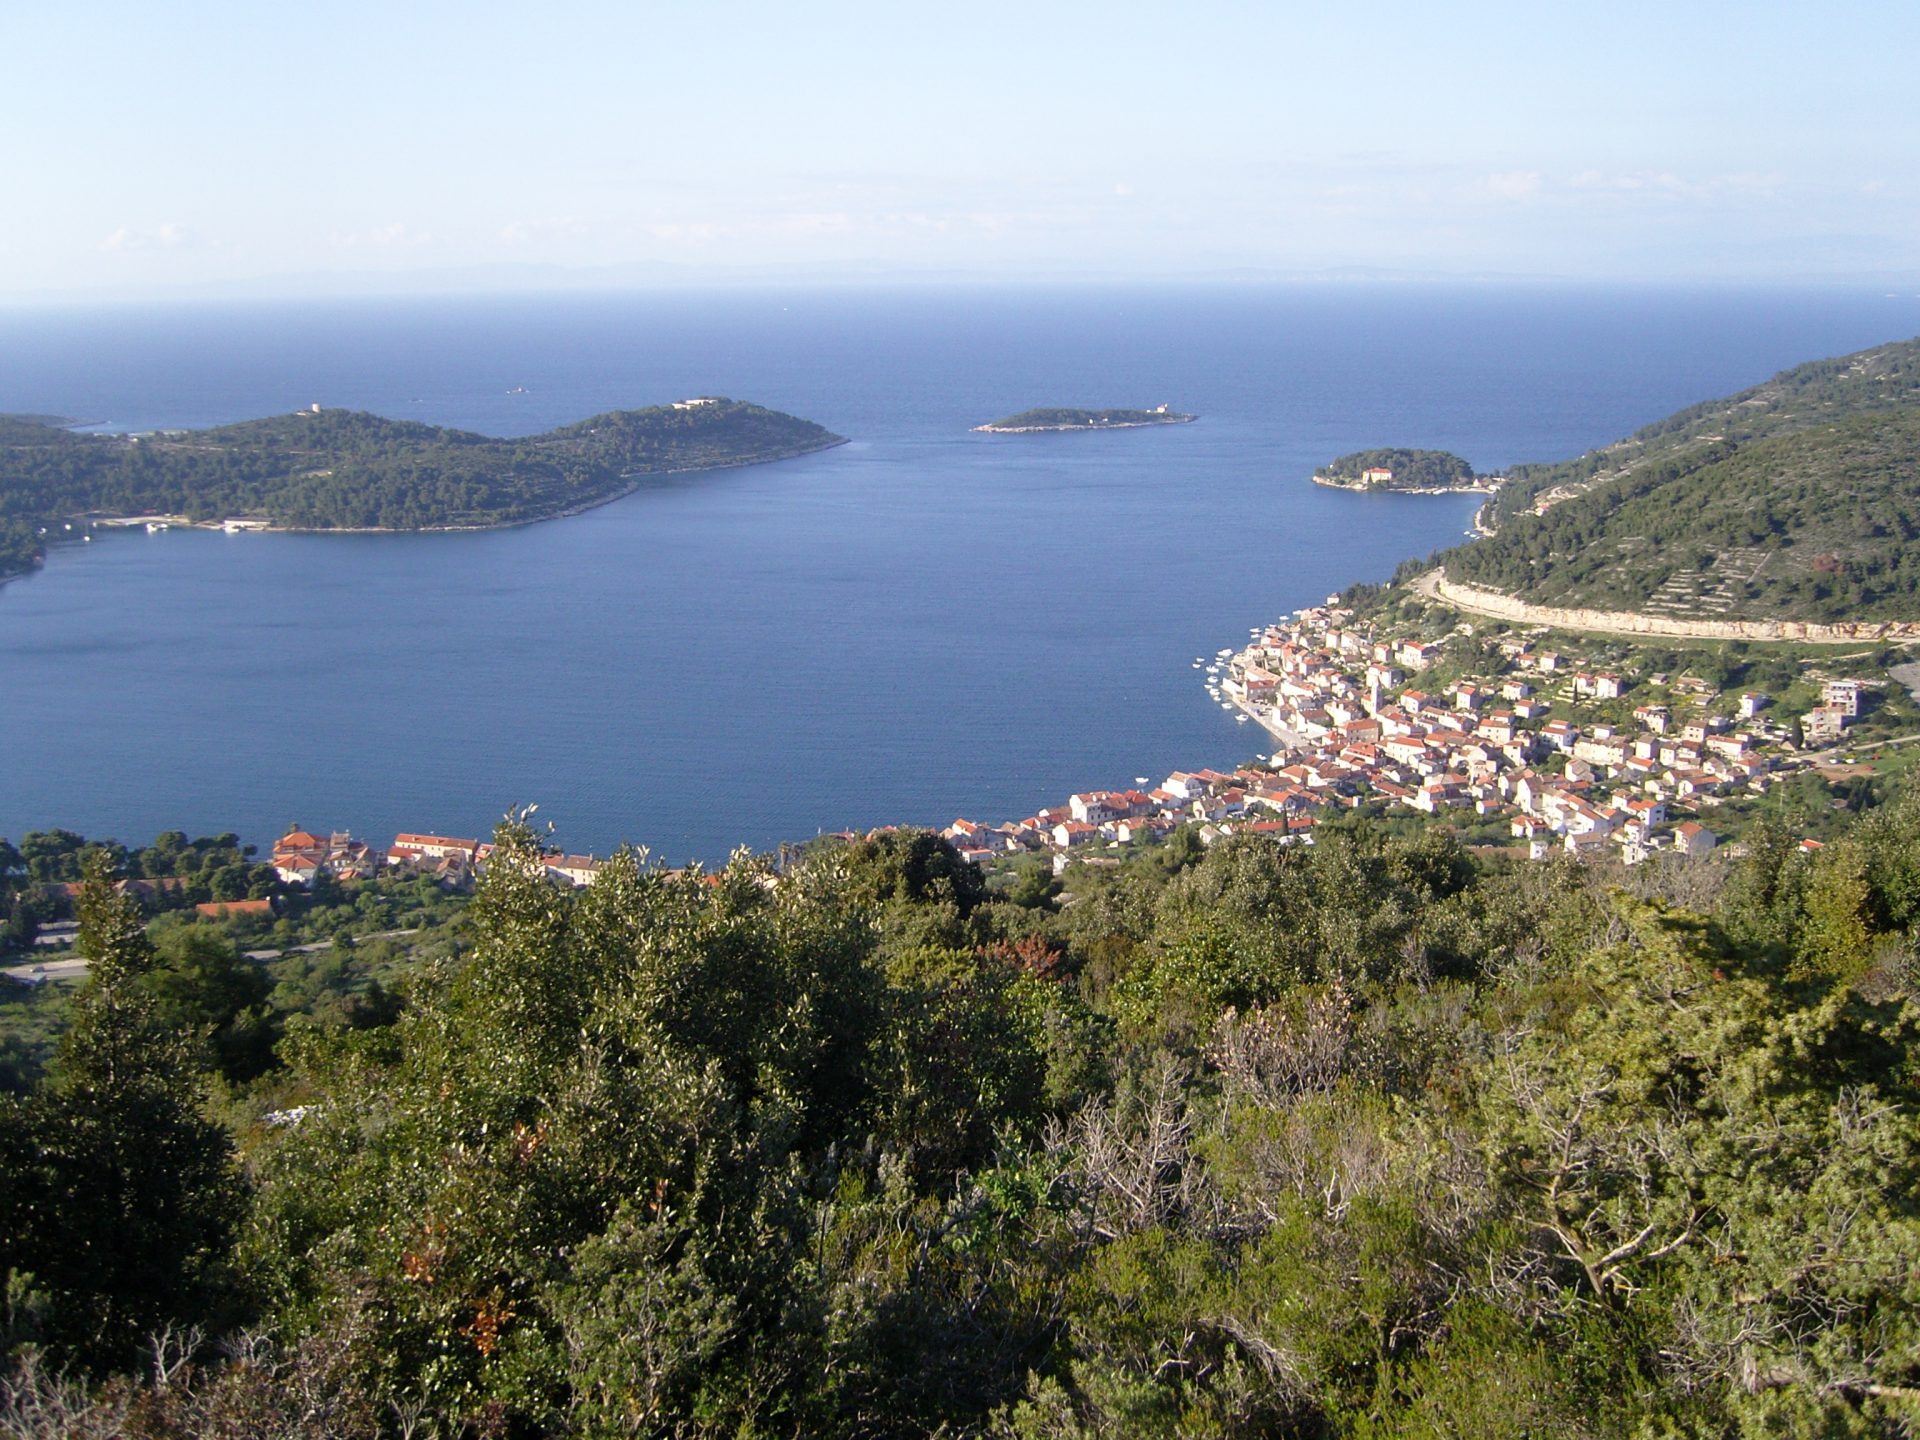 Vis island overview, from Time Out